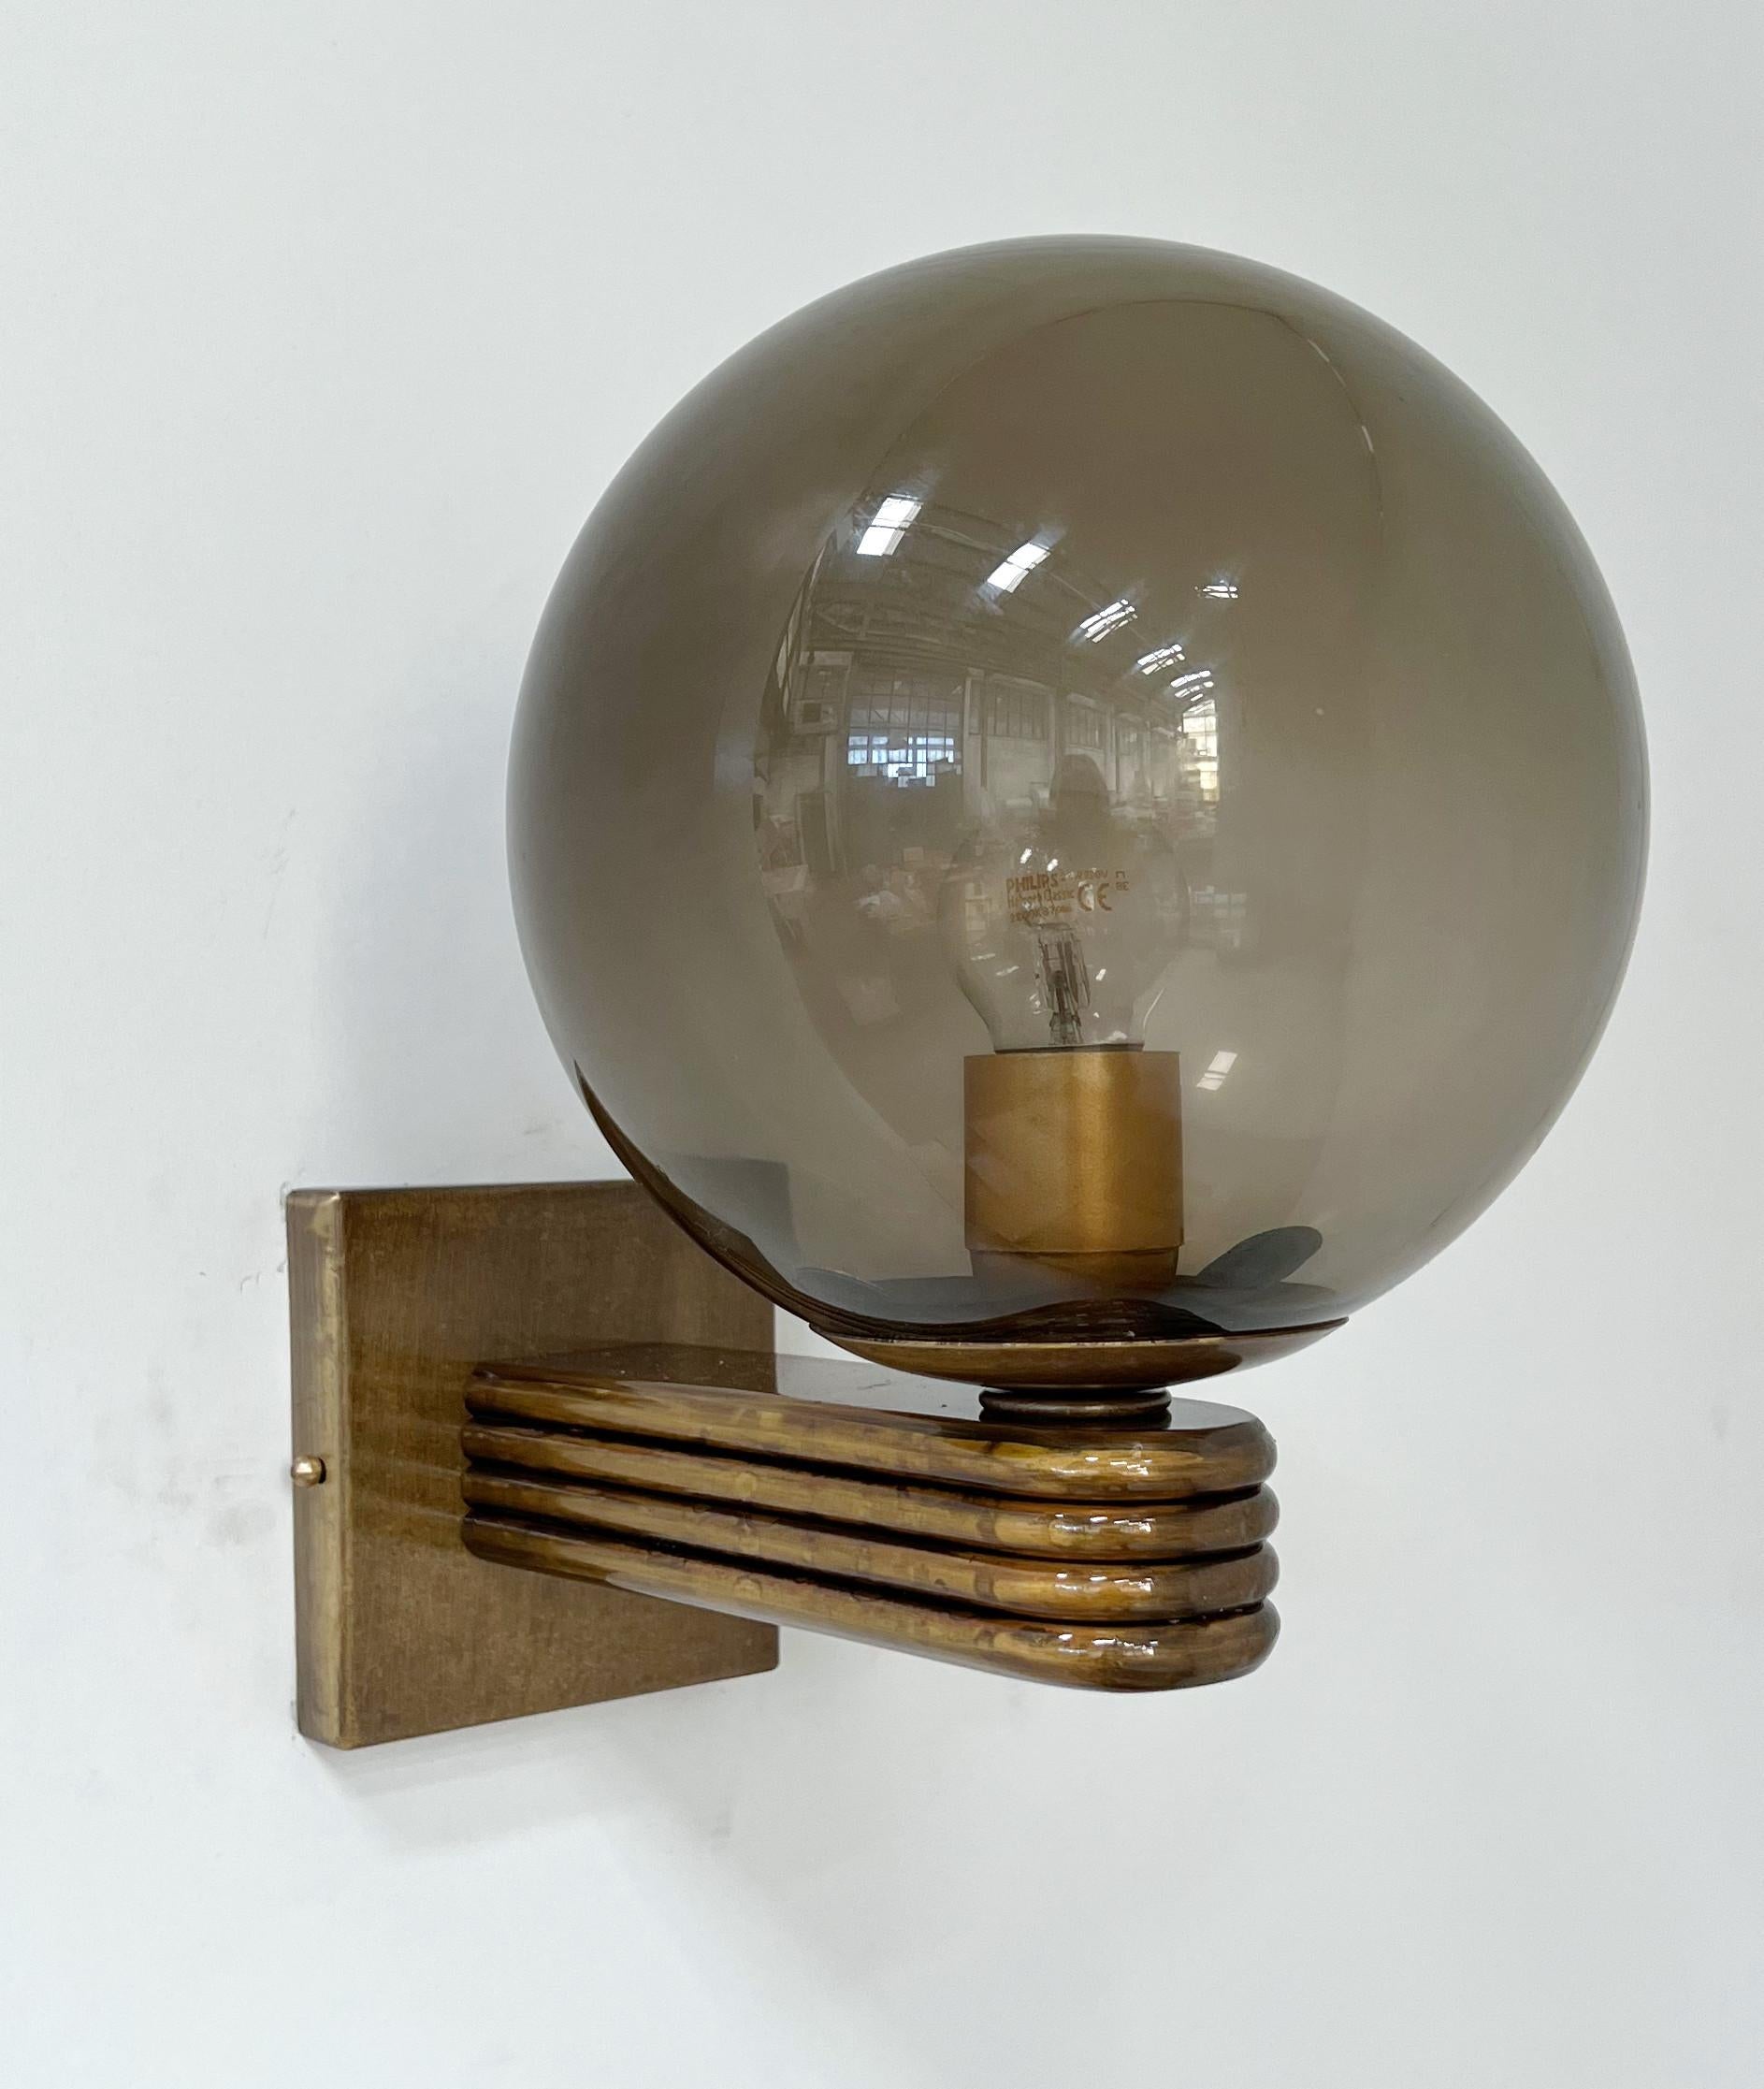 Italian Art Deco style wall light with smoky Murano glass globe mounted on bronzed finish frame, designed by Fabio Bergomi for Fabio Ltd, made in Italy
1 light / E12 or E14 type / max 40W
Measures: Height 12 inches, width 8 inches, depth 10